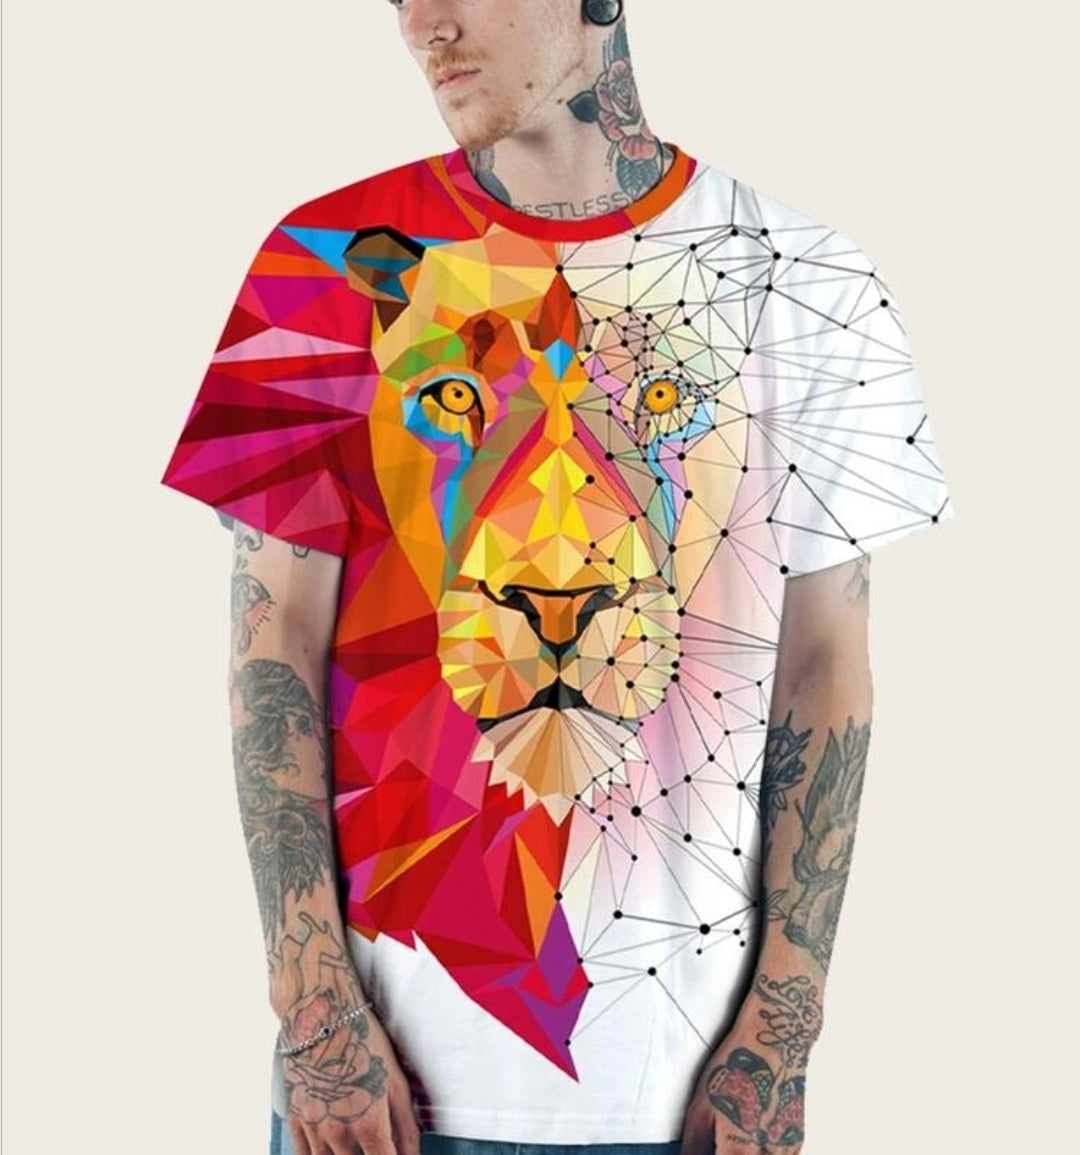 Lion Tshirt: A Stylish Addition to Your Fashion Collection